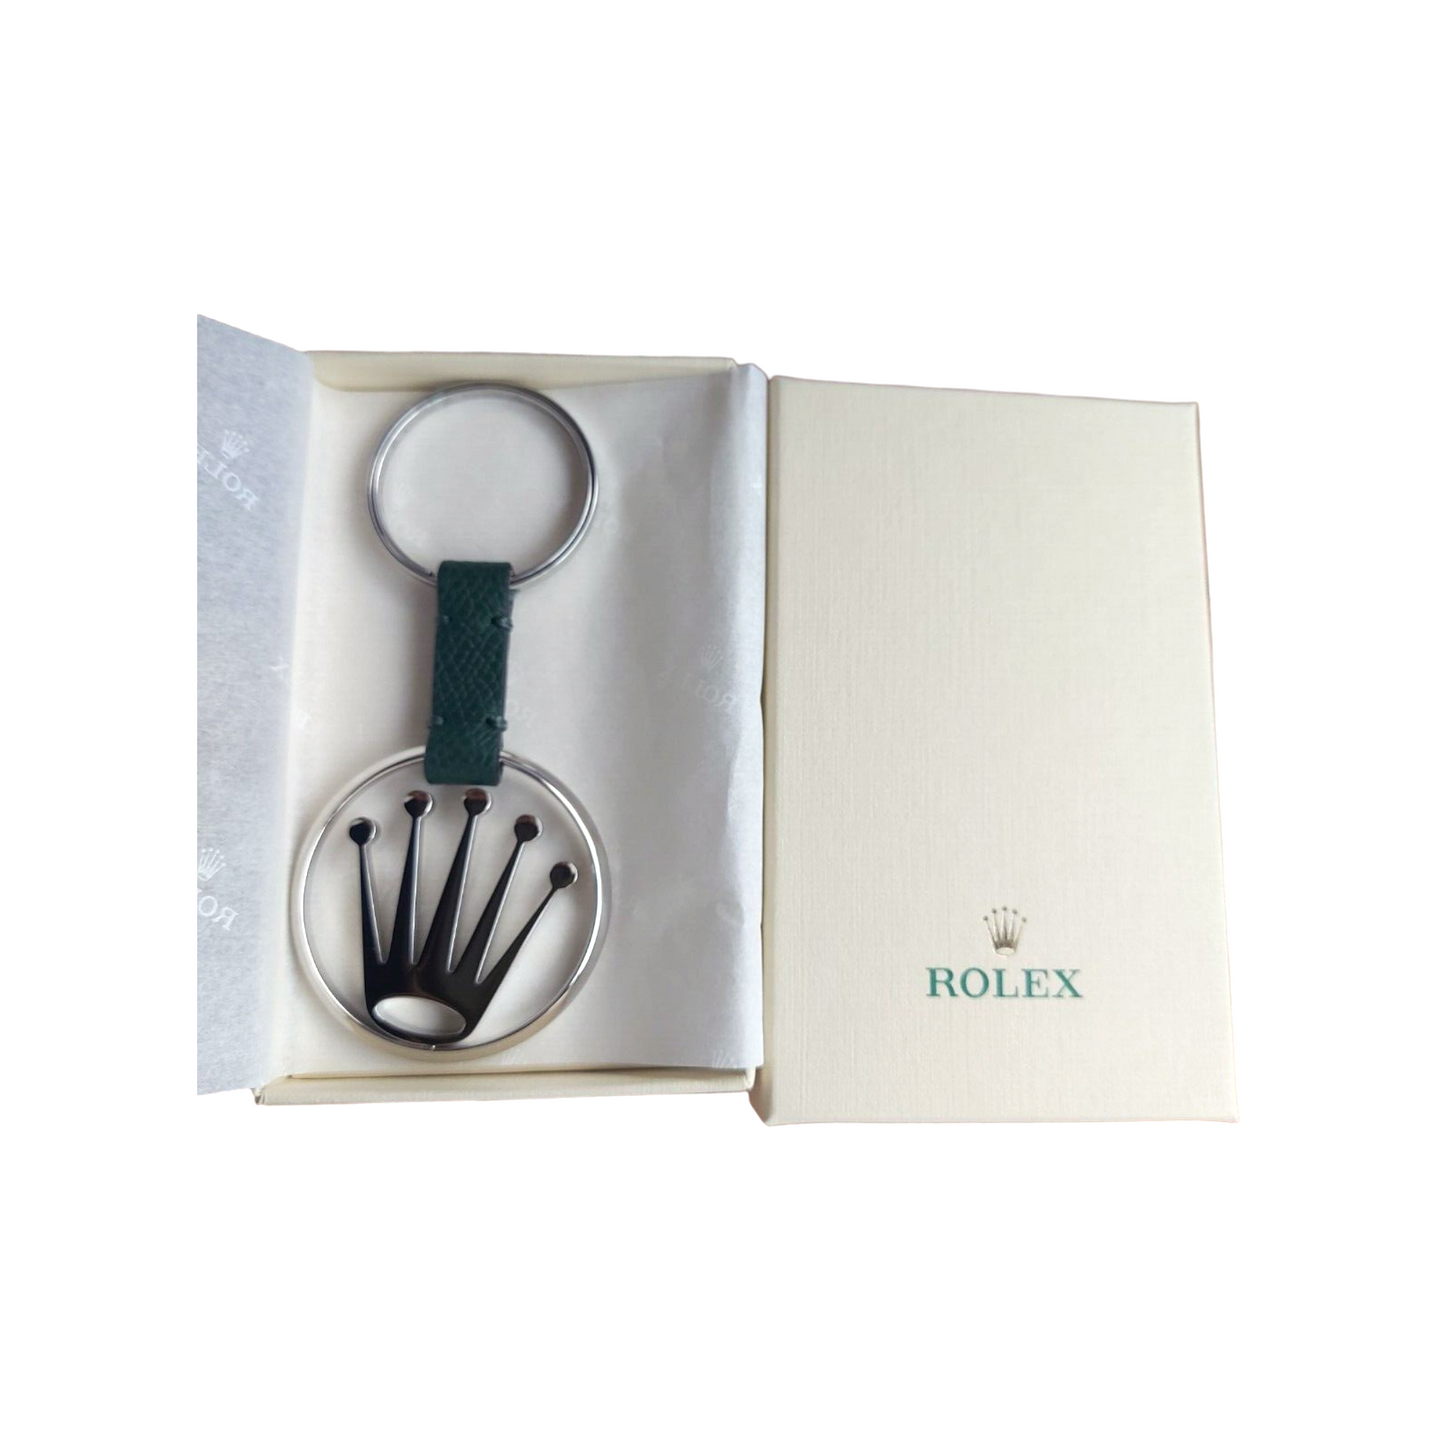 Rolex Oversized Crown Green Key Ring Holder in its original box New